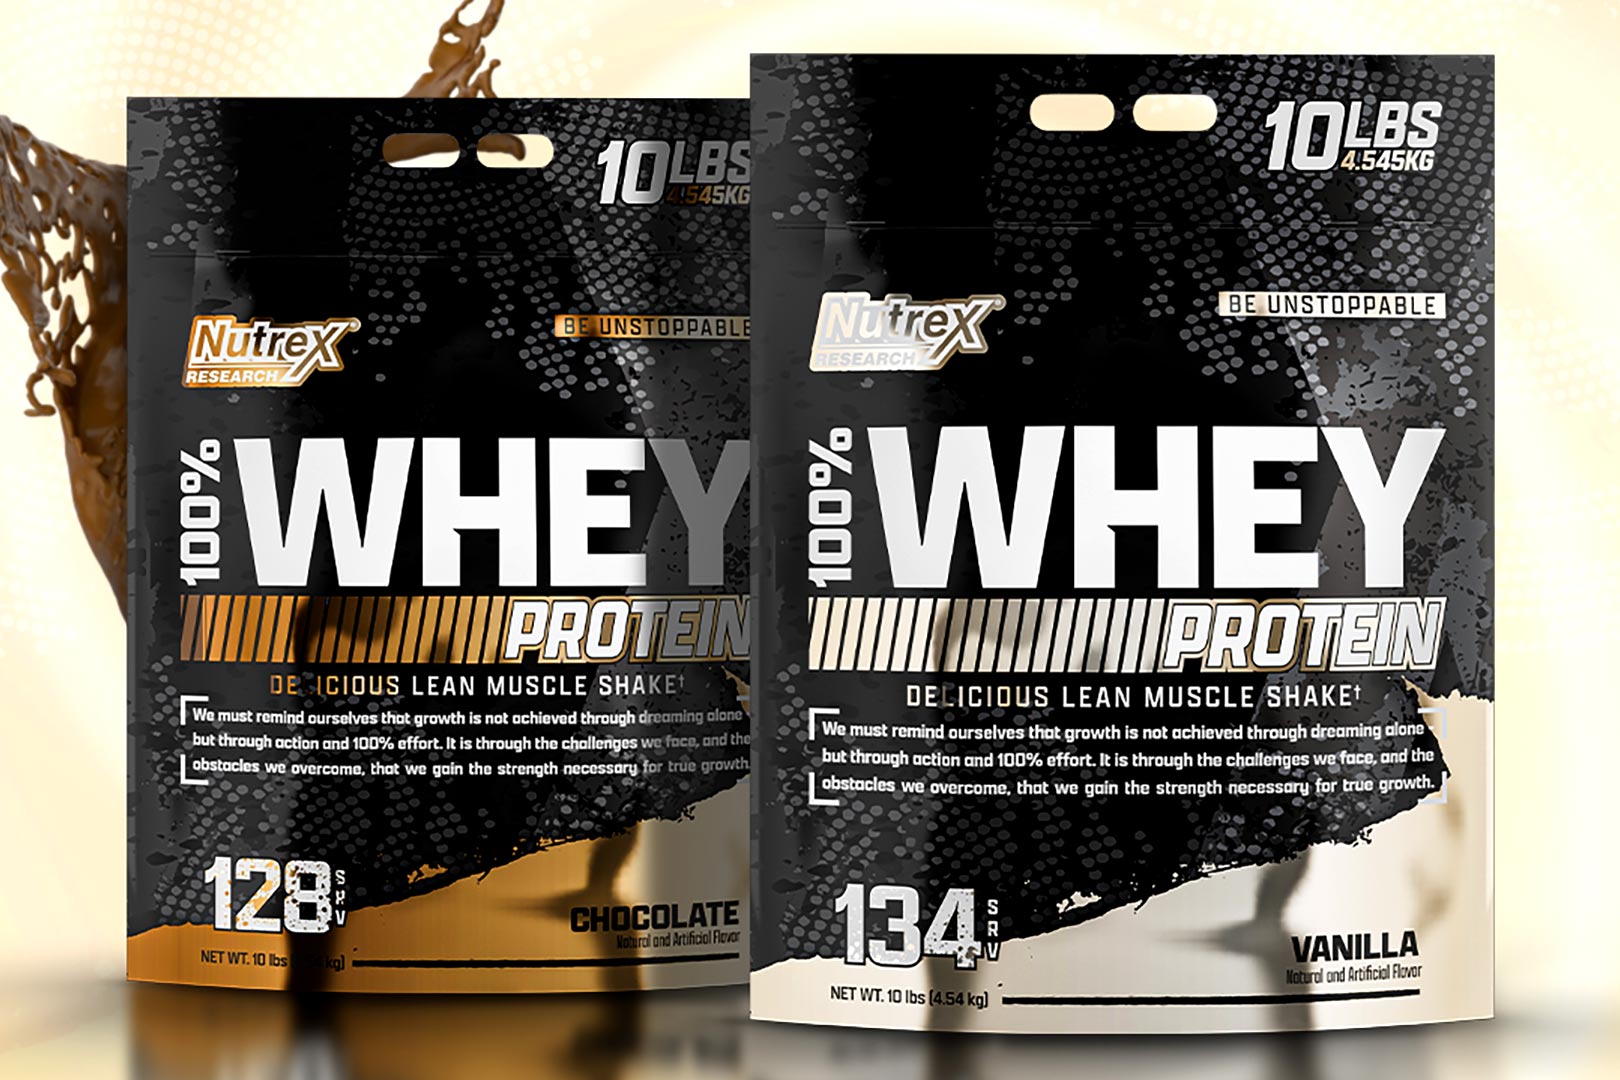 Nutrex 10lb Bag Of Whey Protein